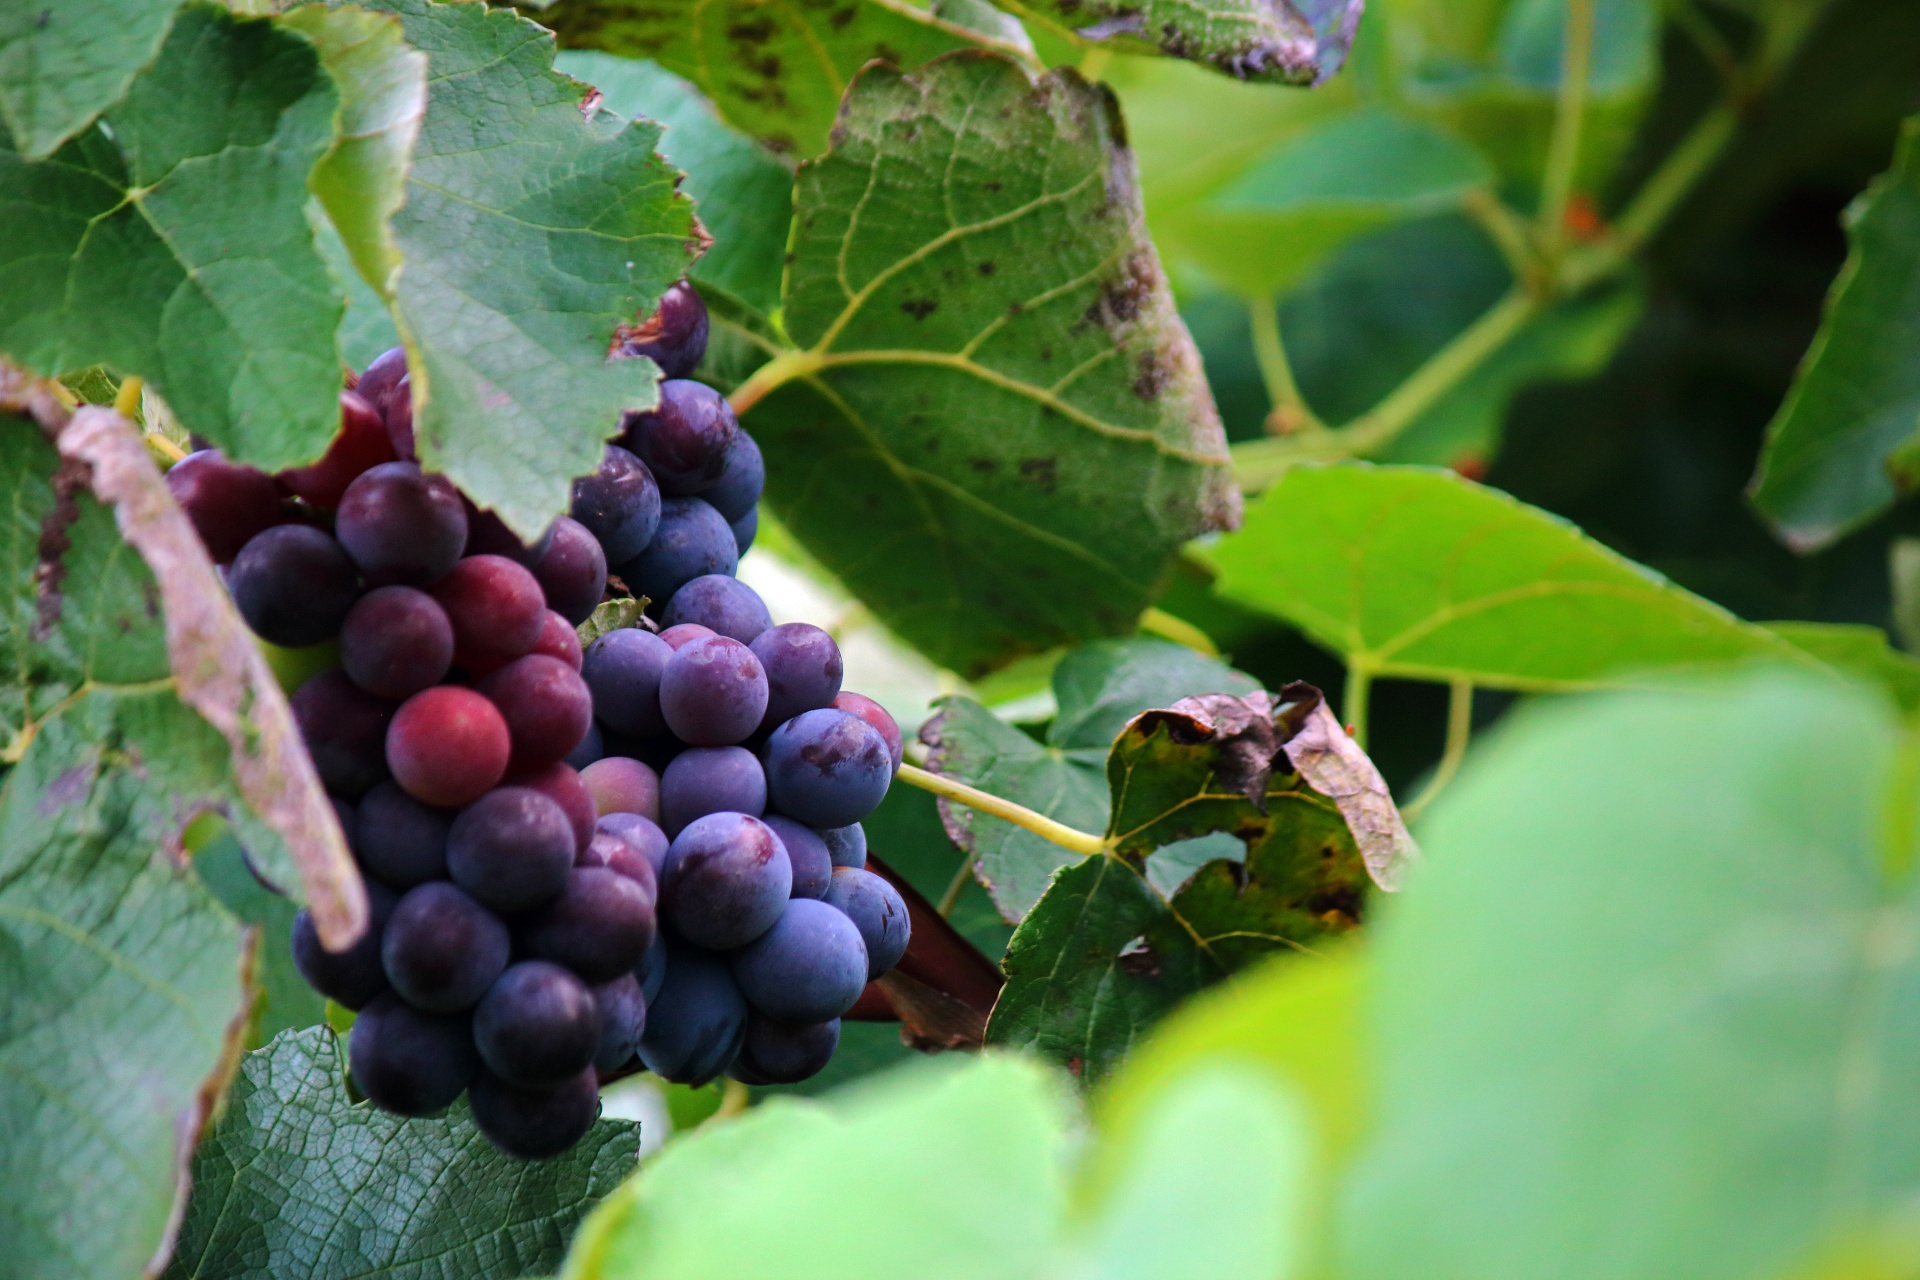 Ripening Bunches Of Grapes On Vine